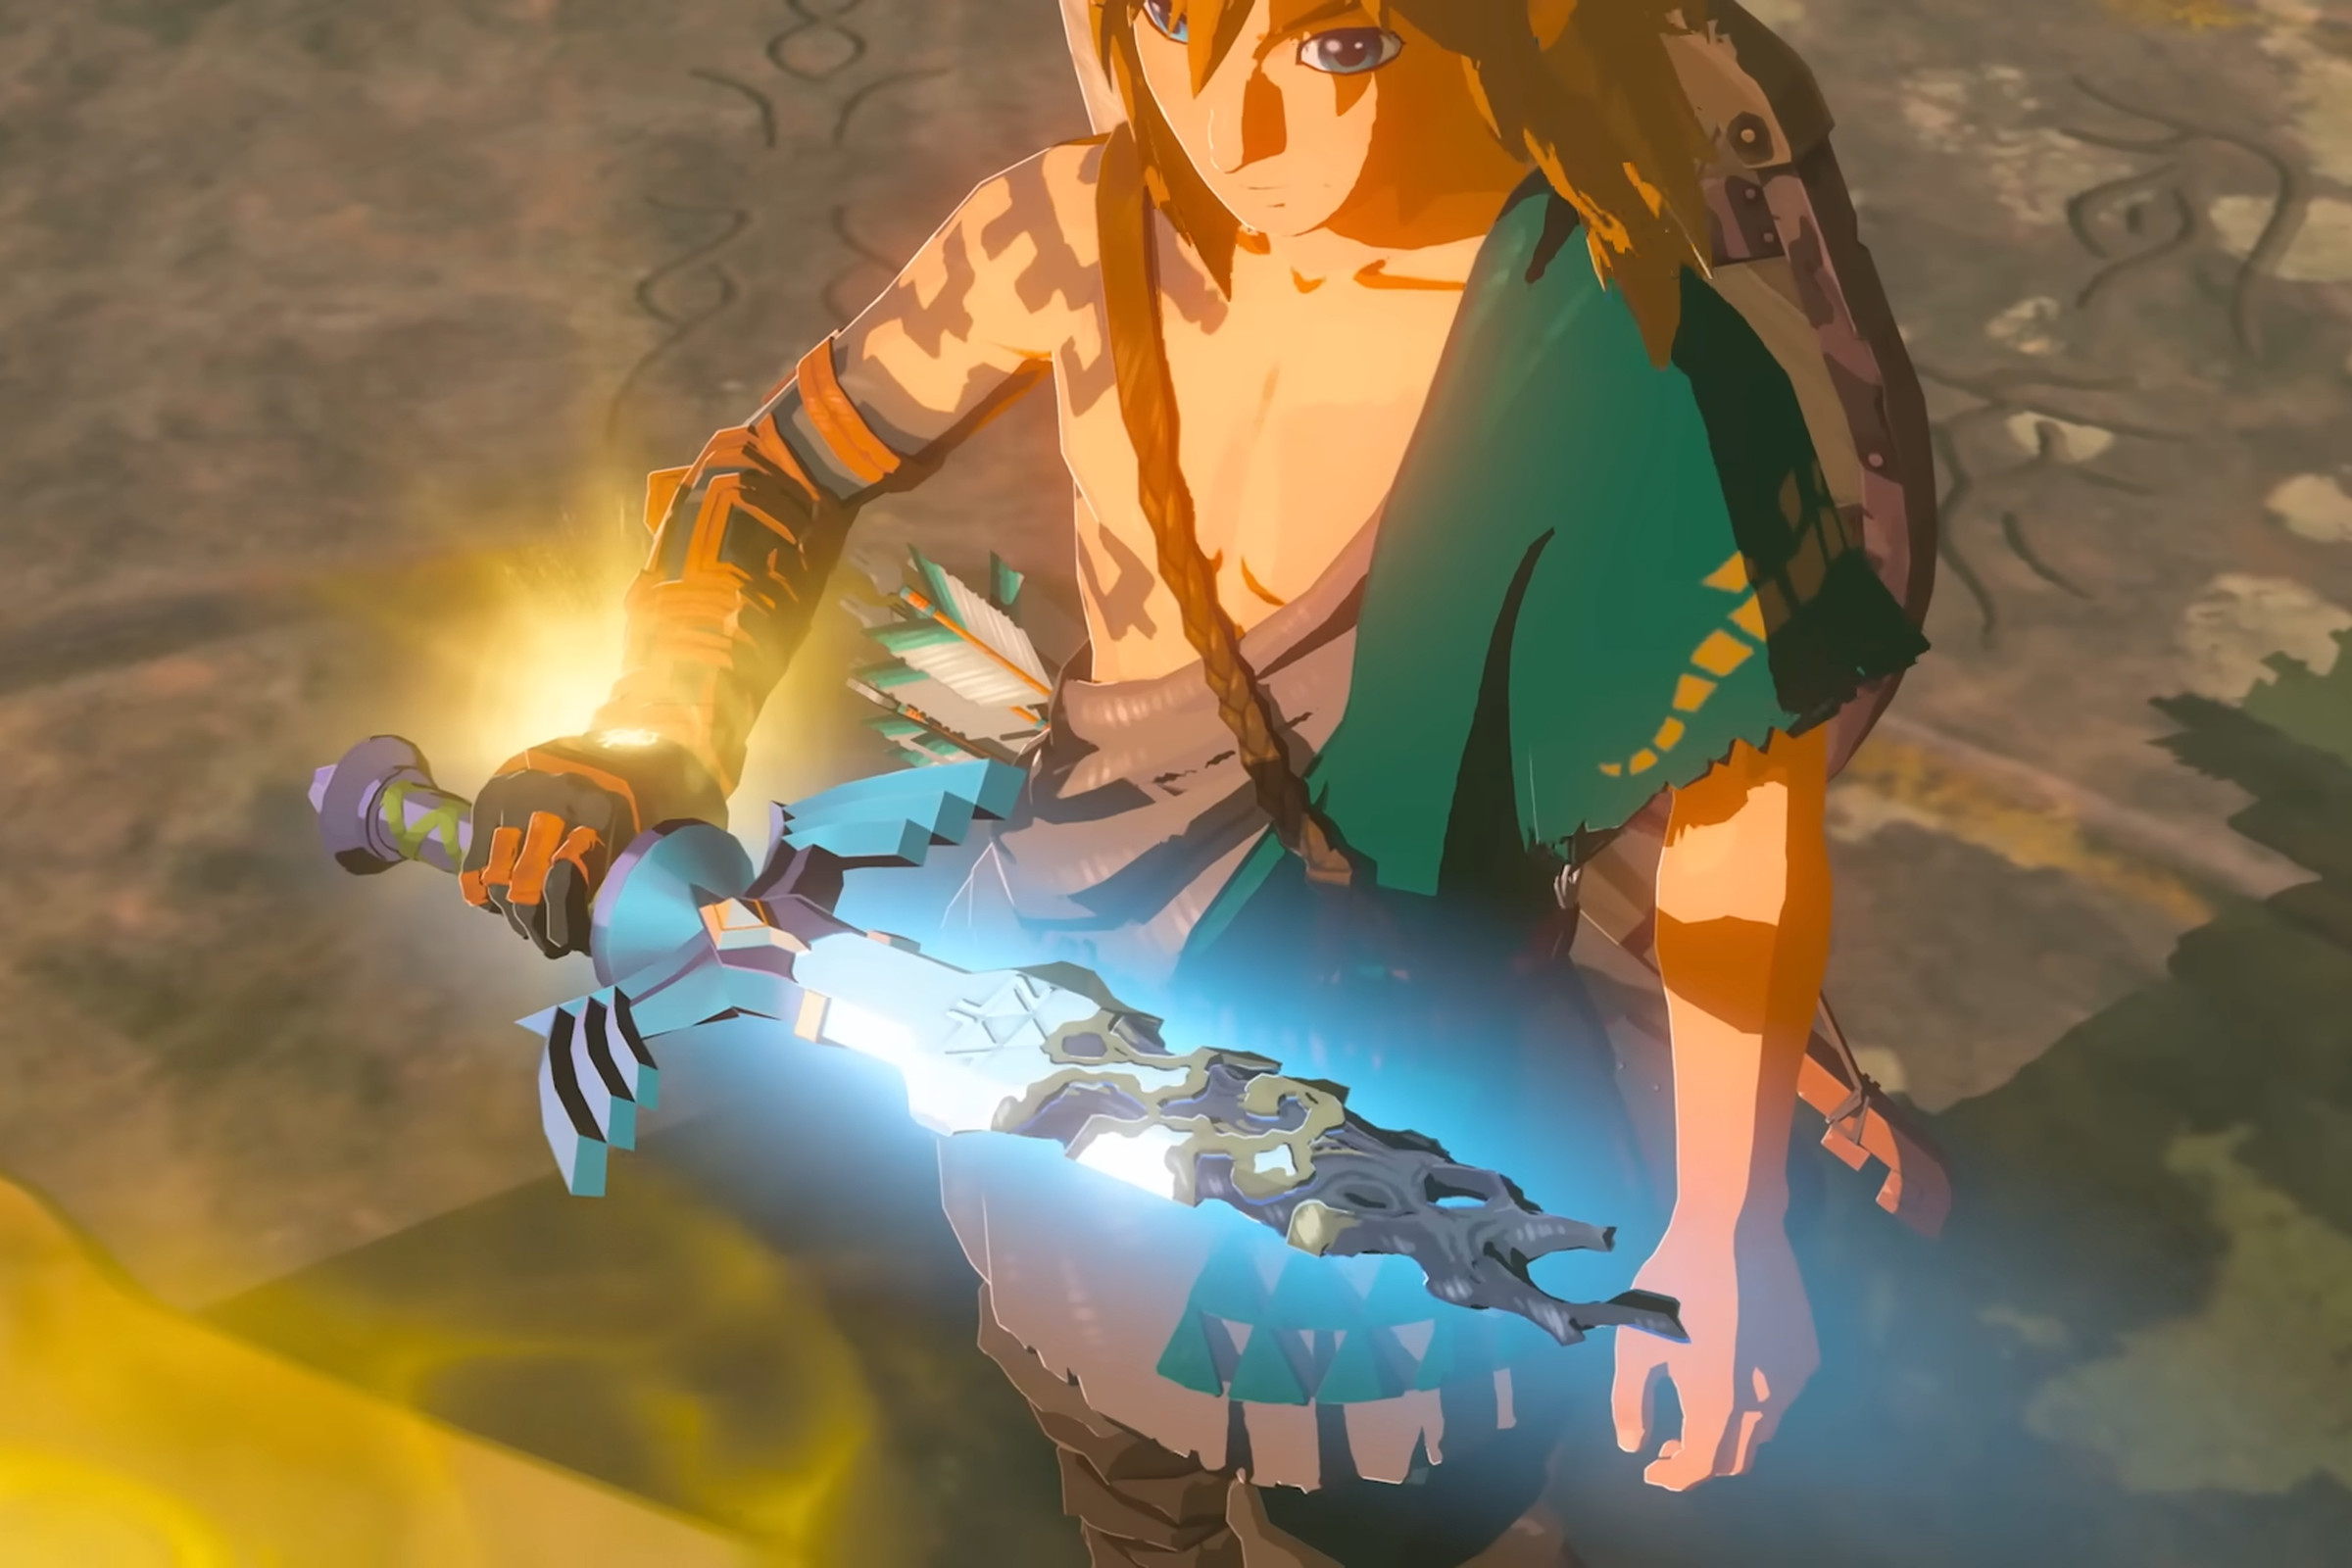 Link holds a Master Sword in this screenshot from The Legend of Zelda: Tears of the Kingdom.